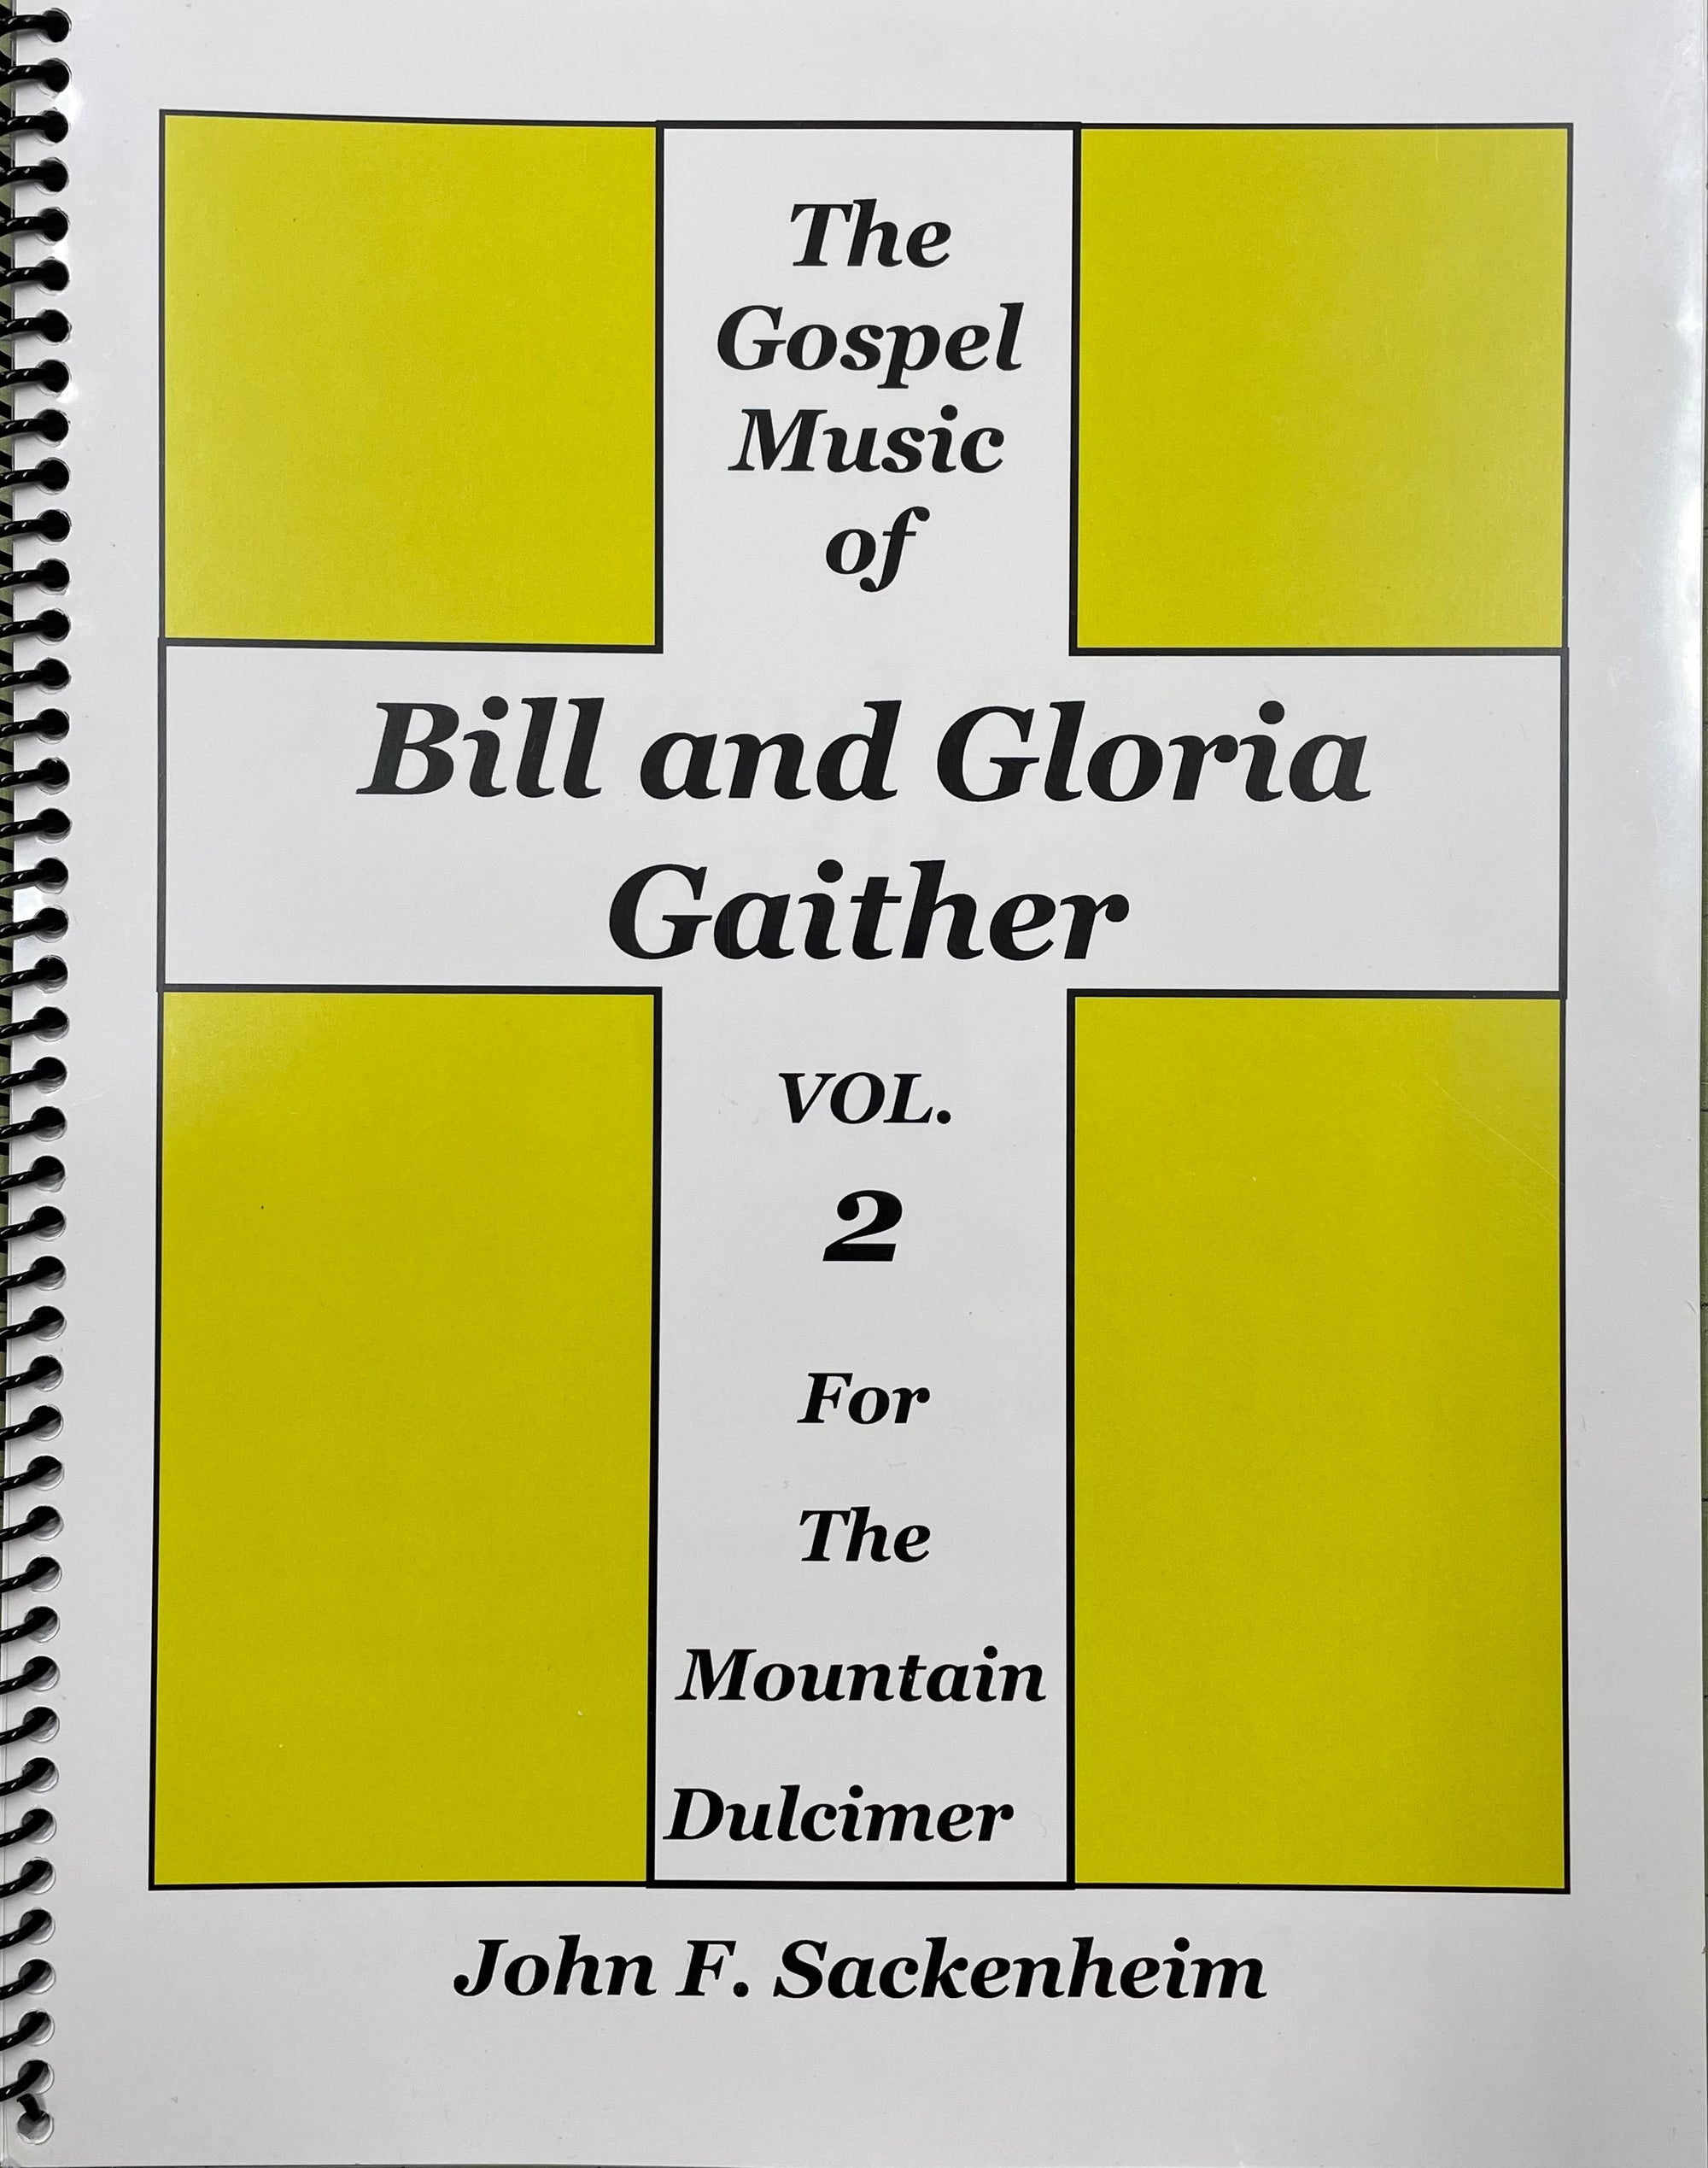 Sheet music book cover for "The Gospel Music of Bill and Gloria Gaither Volume 2 for the Mountain Dulcimer in DAd Tuning" by John Sackenheim.